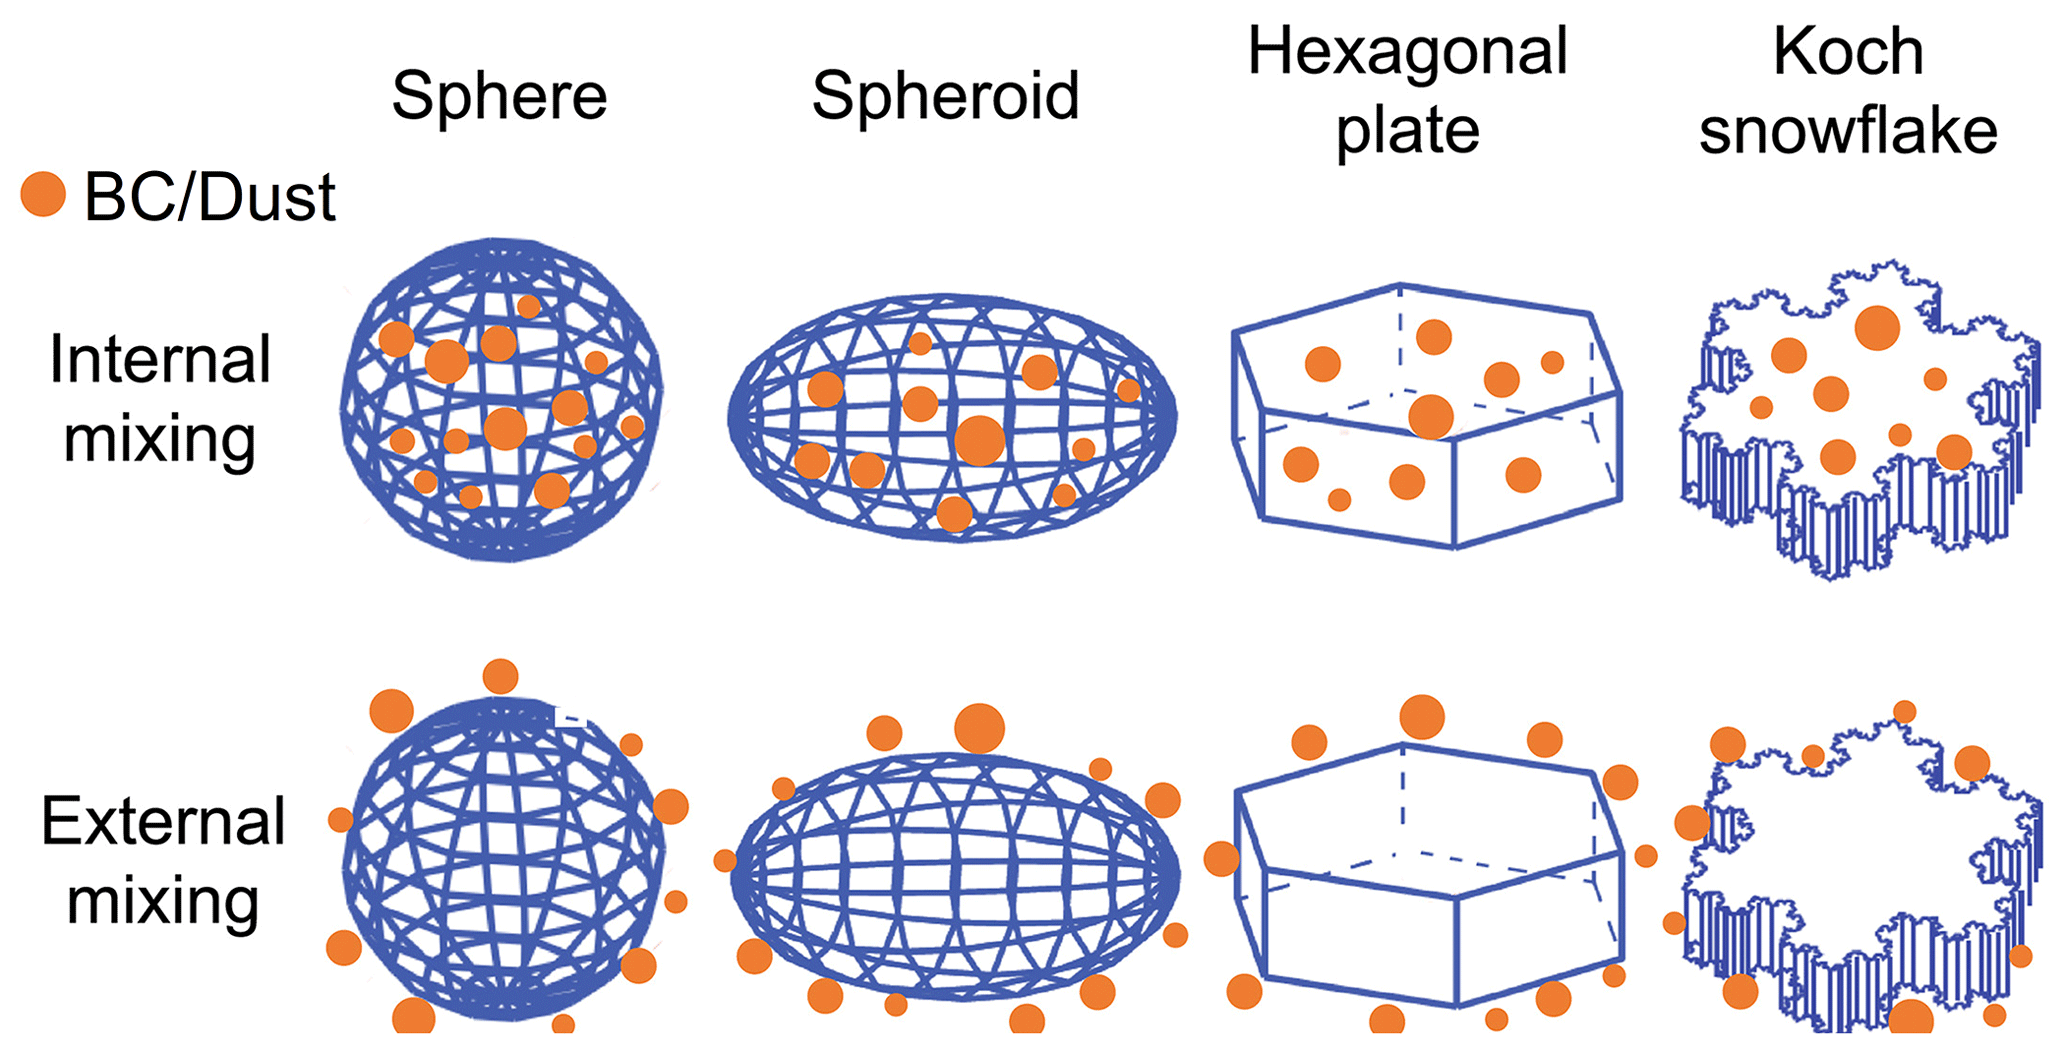 Figure 1. Schematics of four typical snow grain shapes (sphere, spheroid, hexagonal plate, and Koch snowflake) and two different mixing states of black carbon BC–snow or dust–snow: internal and external. This figure was adapted from He et al. (2019).